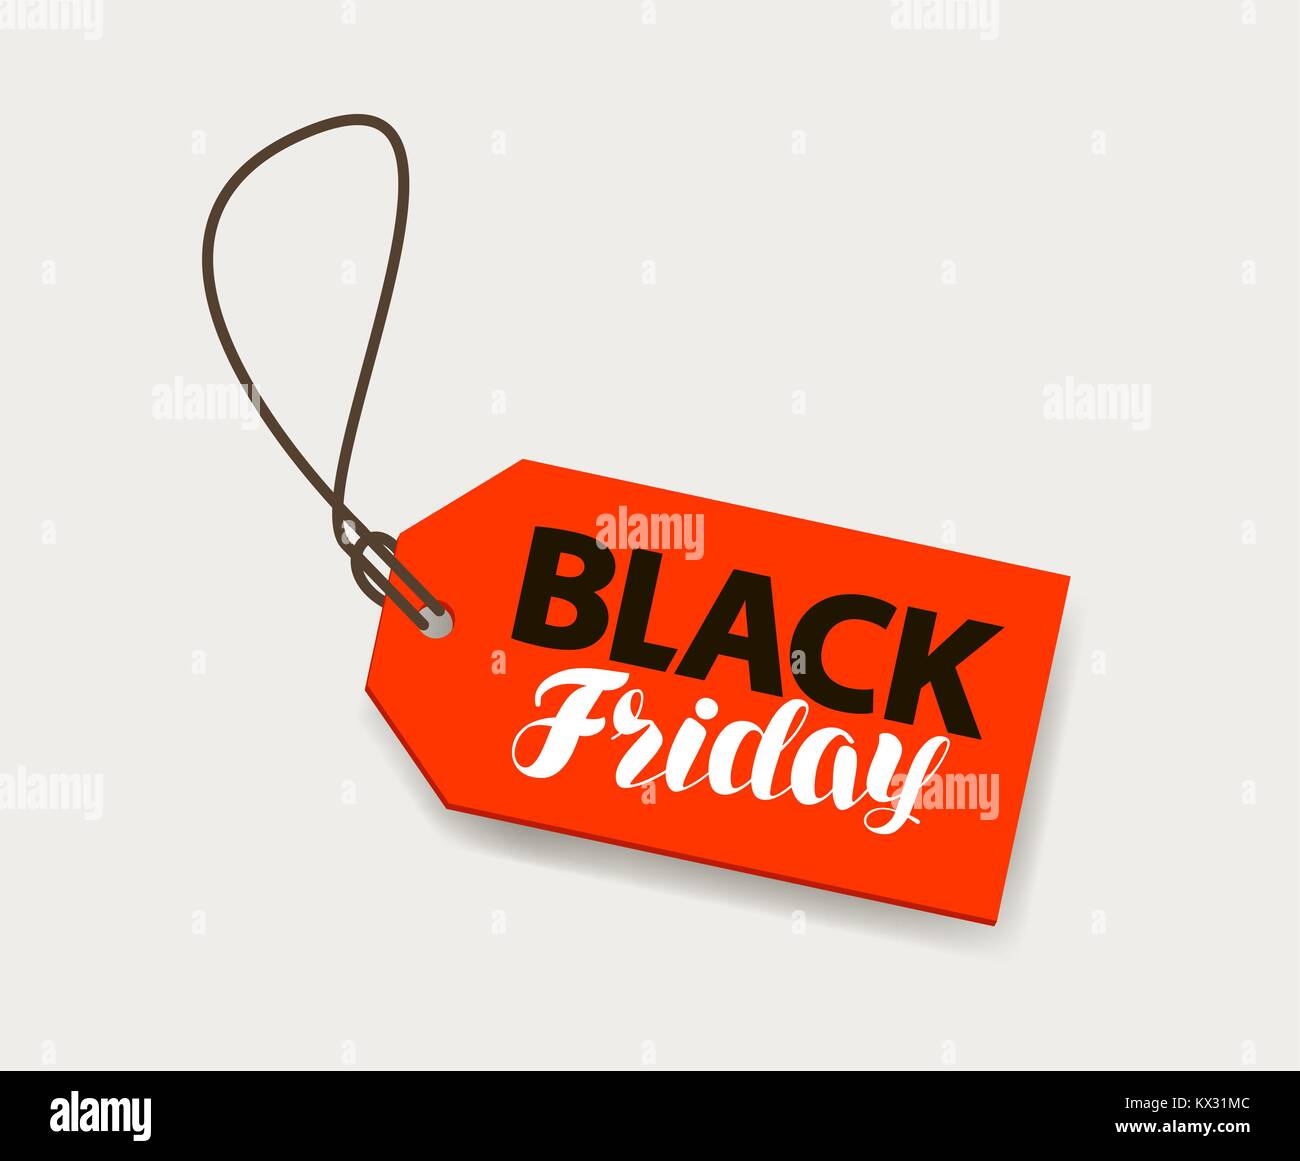 Black Friday, Sale banner. Price tag, shopping concept. Lettering vector illustration Stock Vector